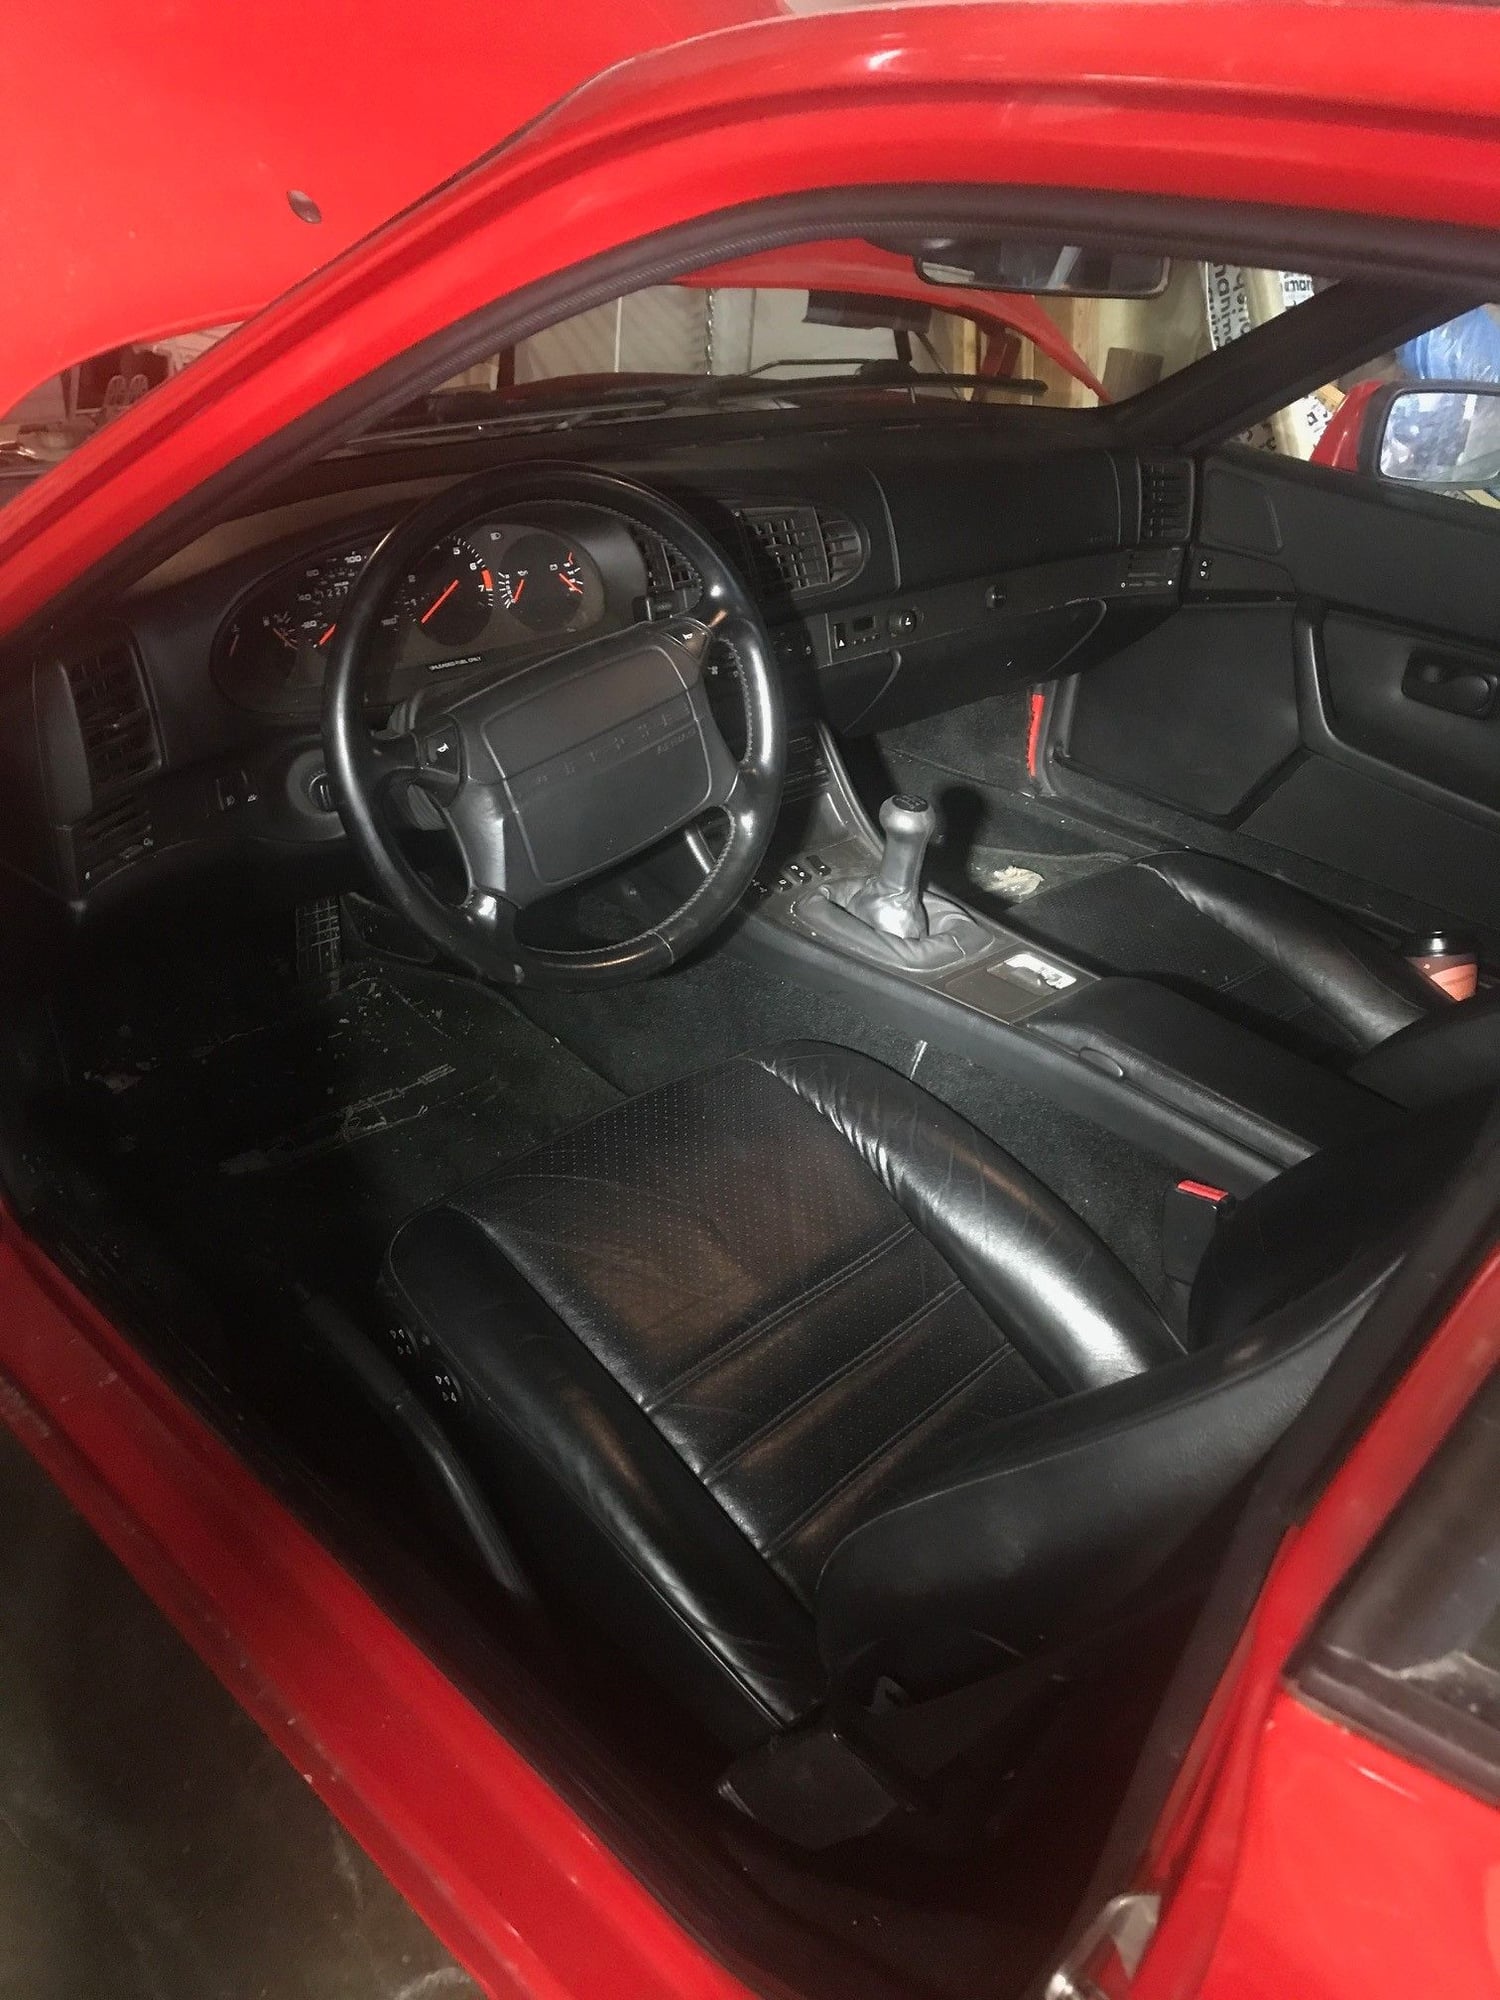 1990 Porsche 944 - Crash damaged 1990 944 S2 - Used - VIN WP0AB2943LN450281 - 122,738 Miles - 4 cyl - 2WD - Manual - Coupe - Red - San Francisco, CA 94114, United States